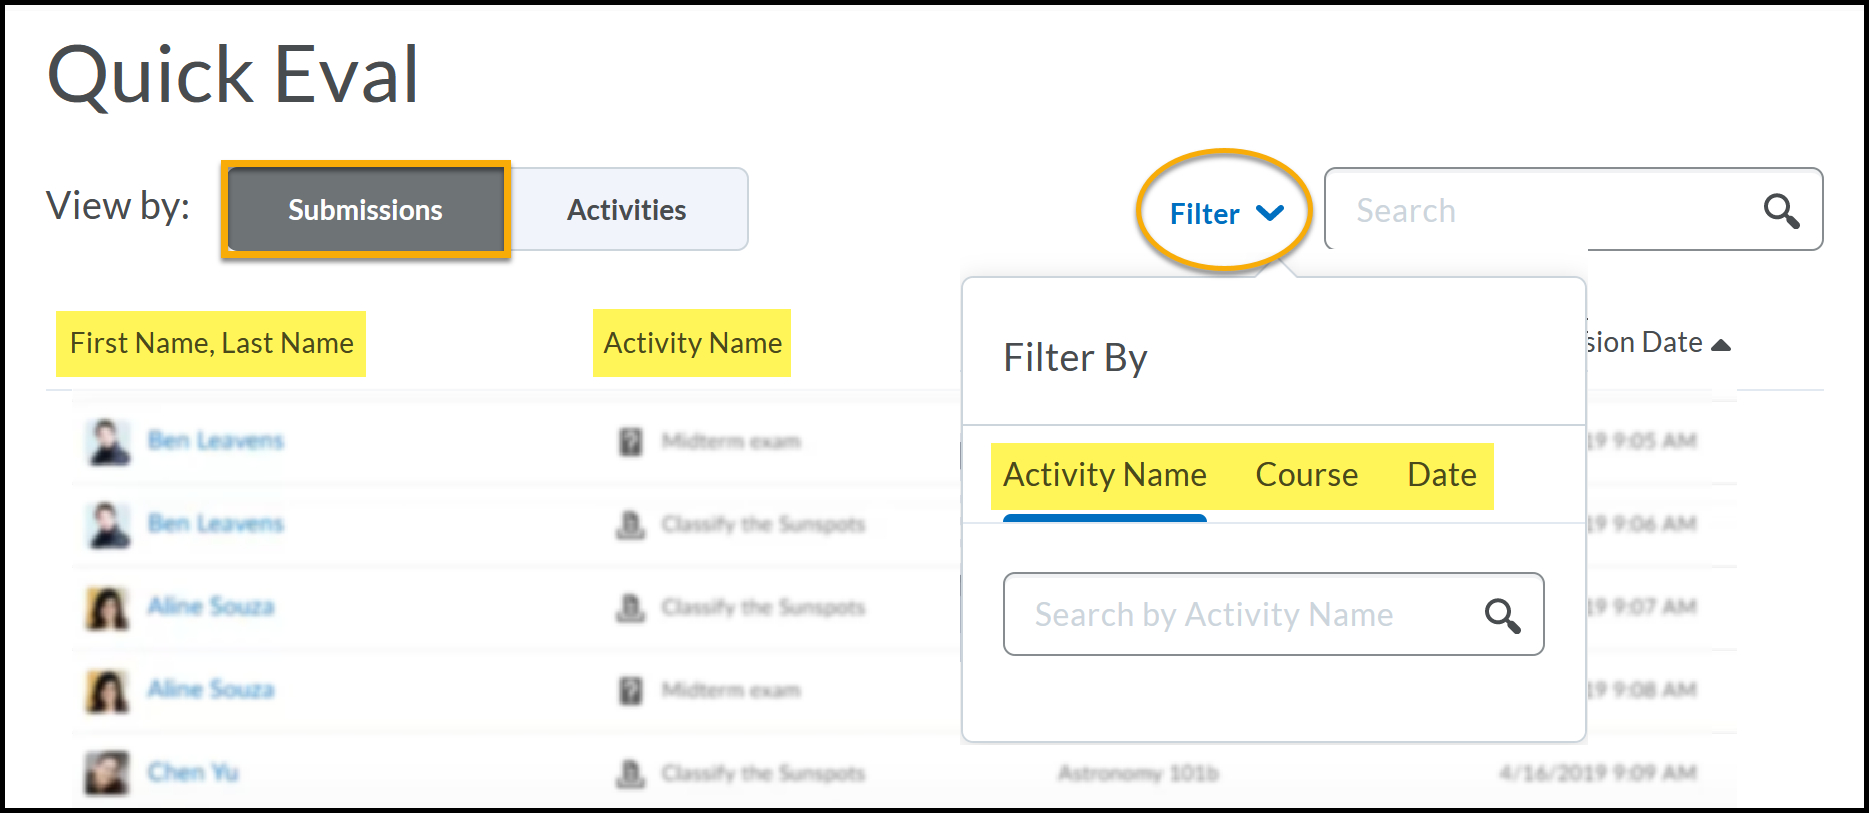 Under submission tab Name and Activity are both highlighted. The Filter is expanded to reveal Activity, Course and Date are also highlighted.